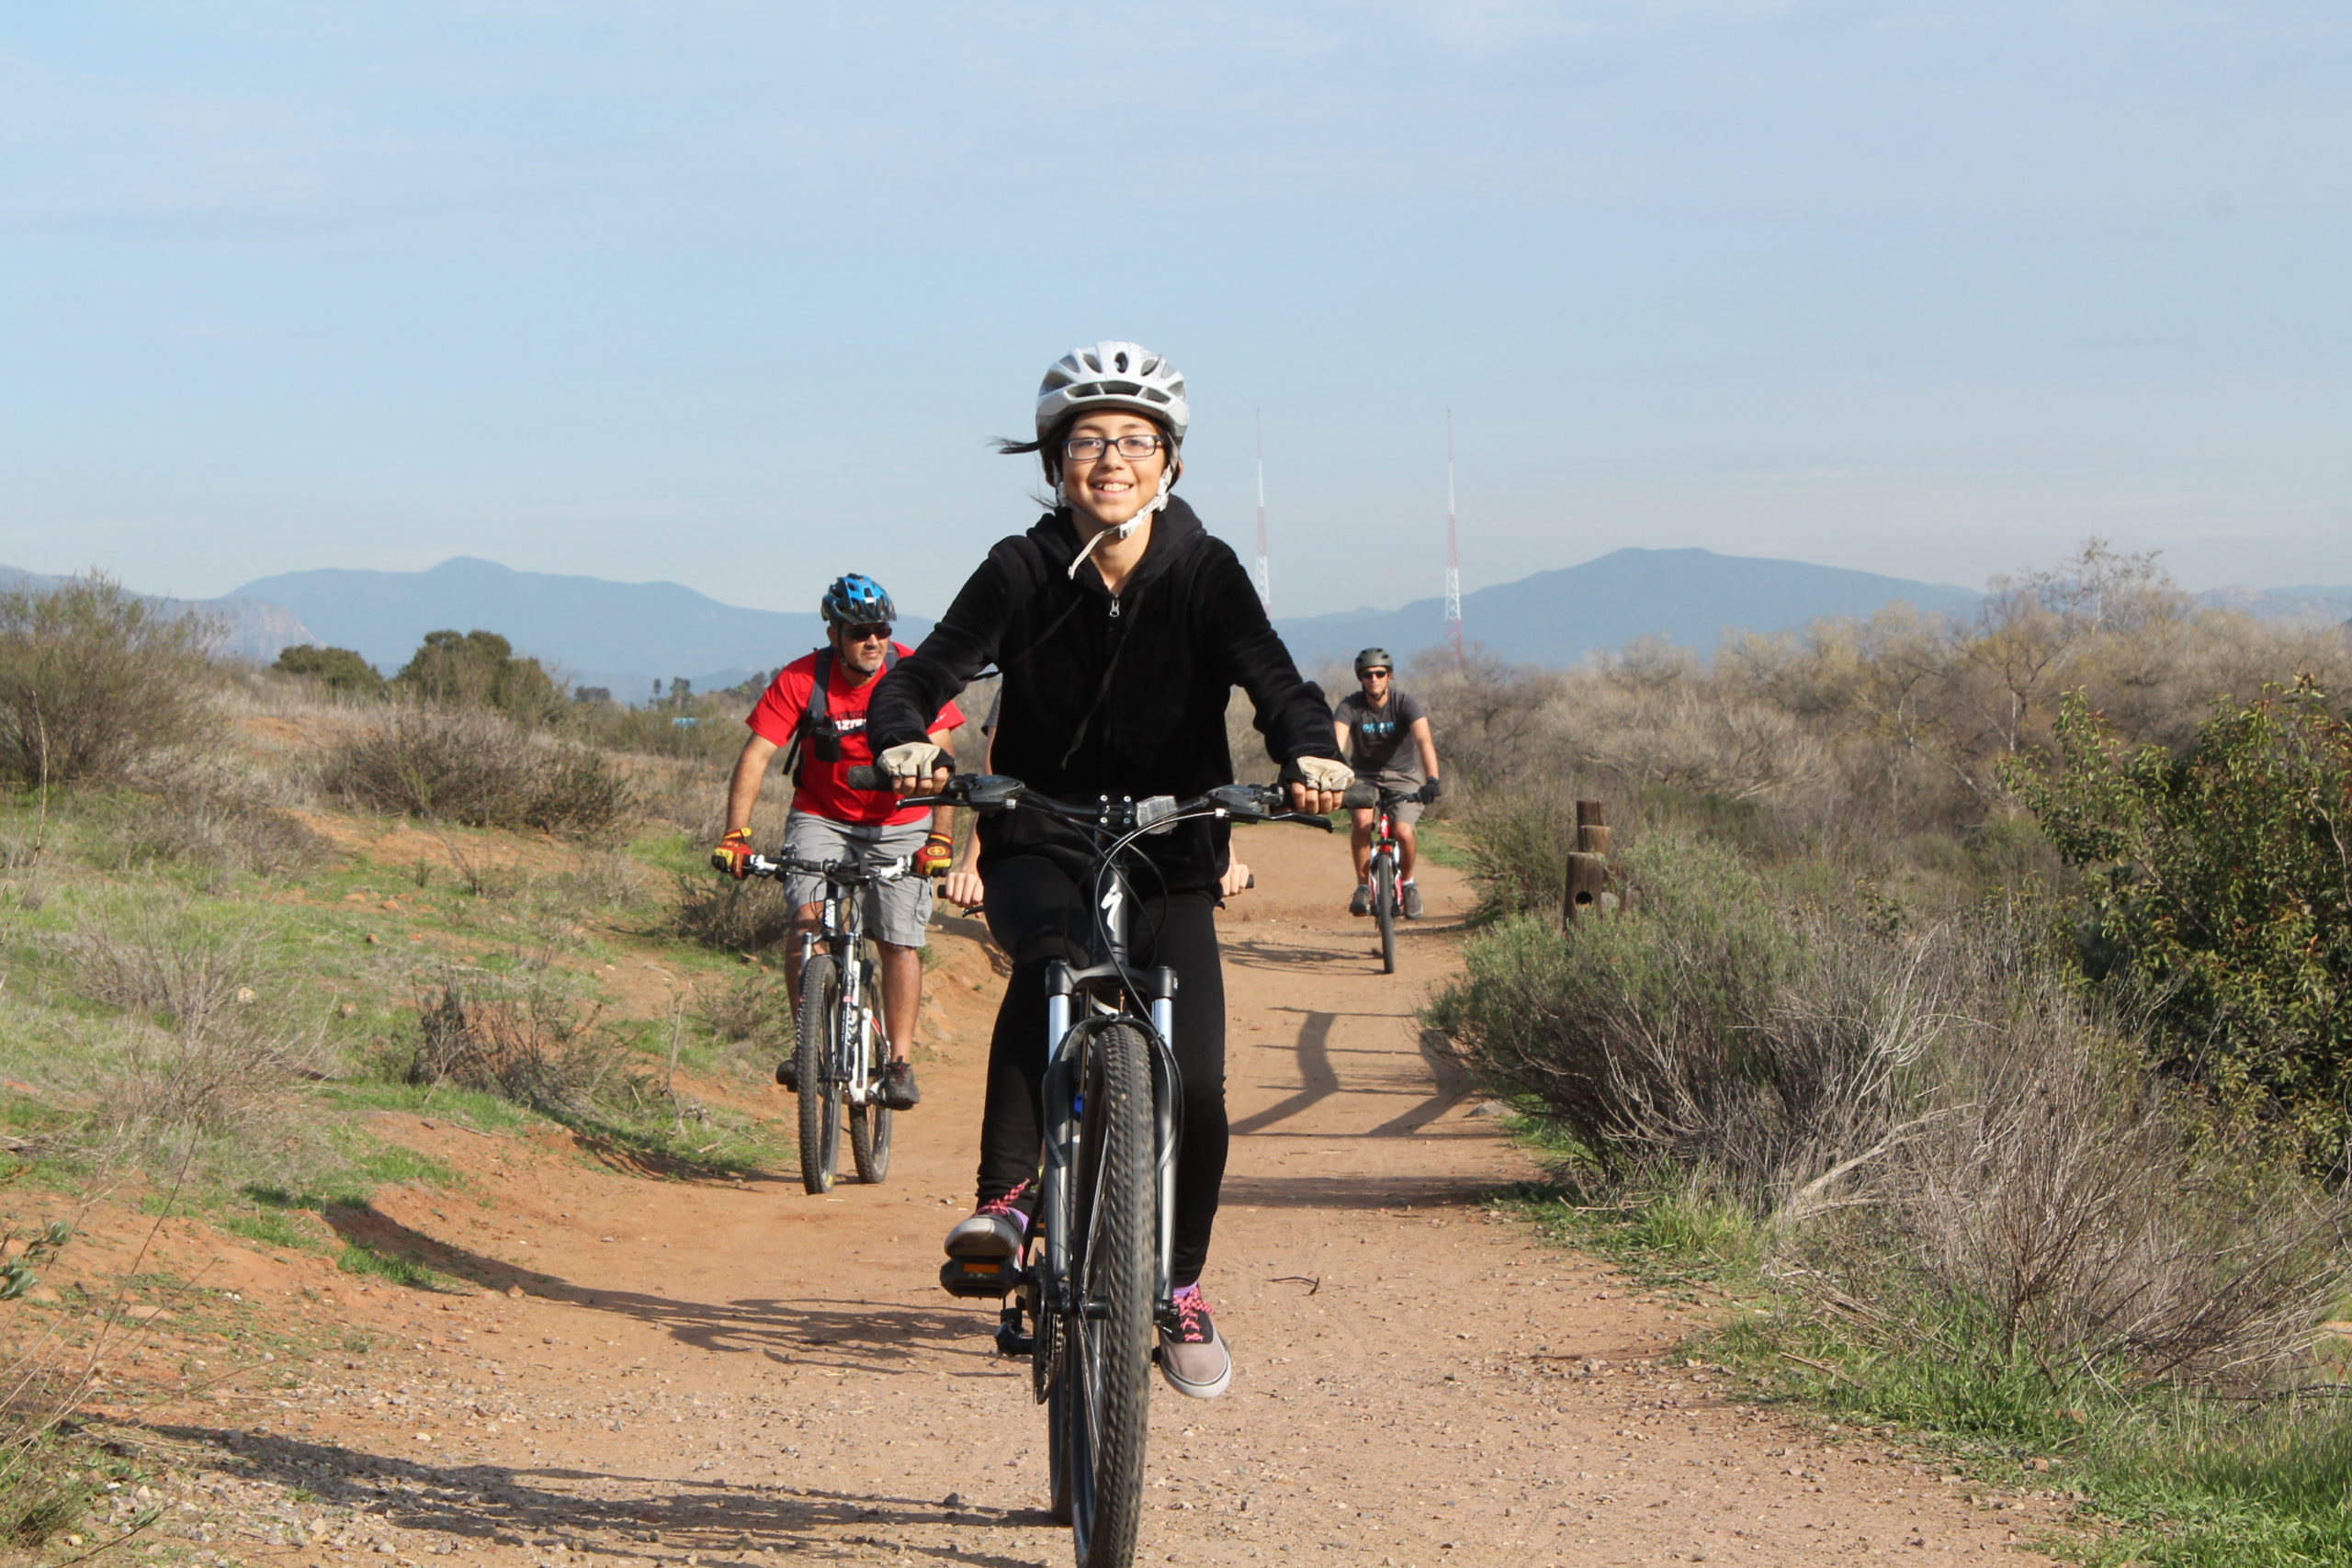 Meet the Cyclists Traveling Cross Country to Support OO